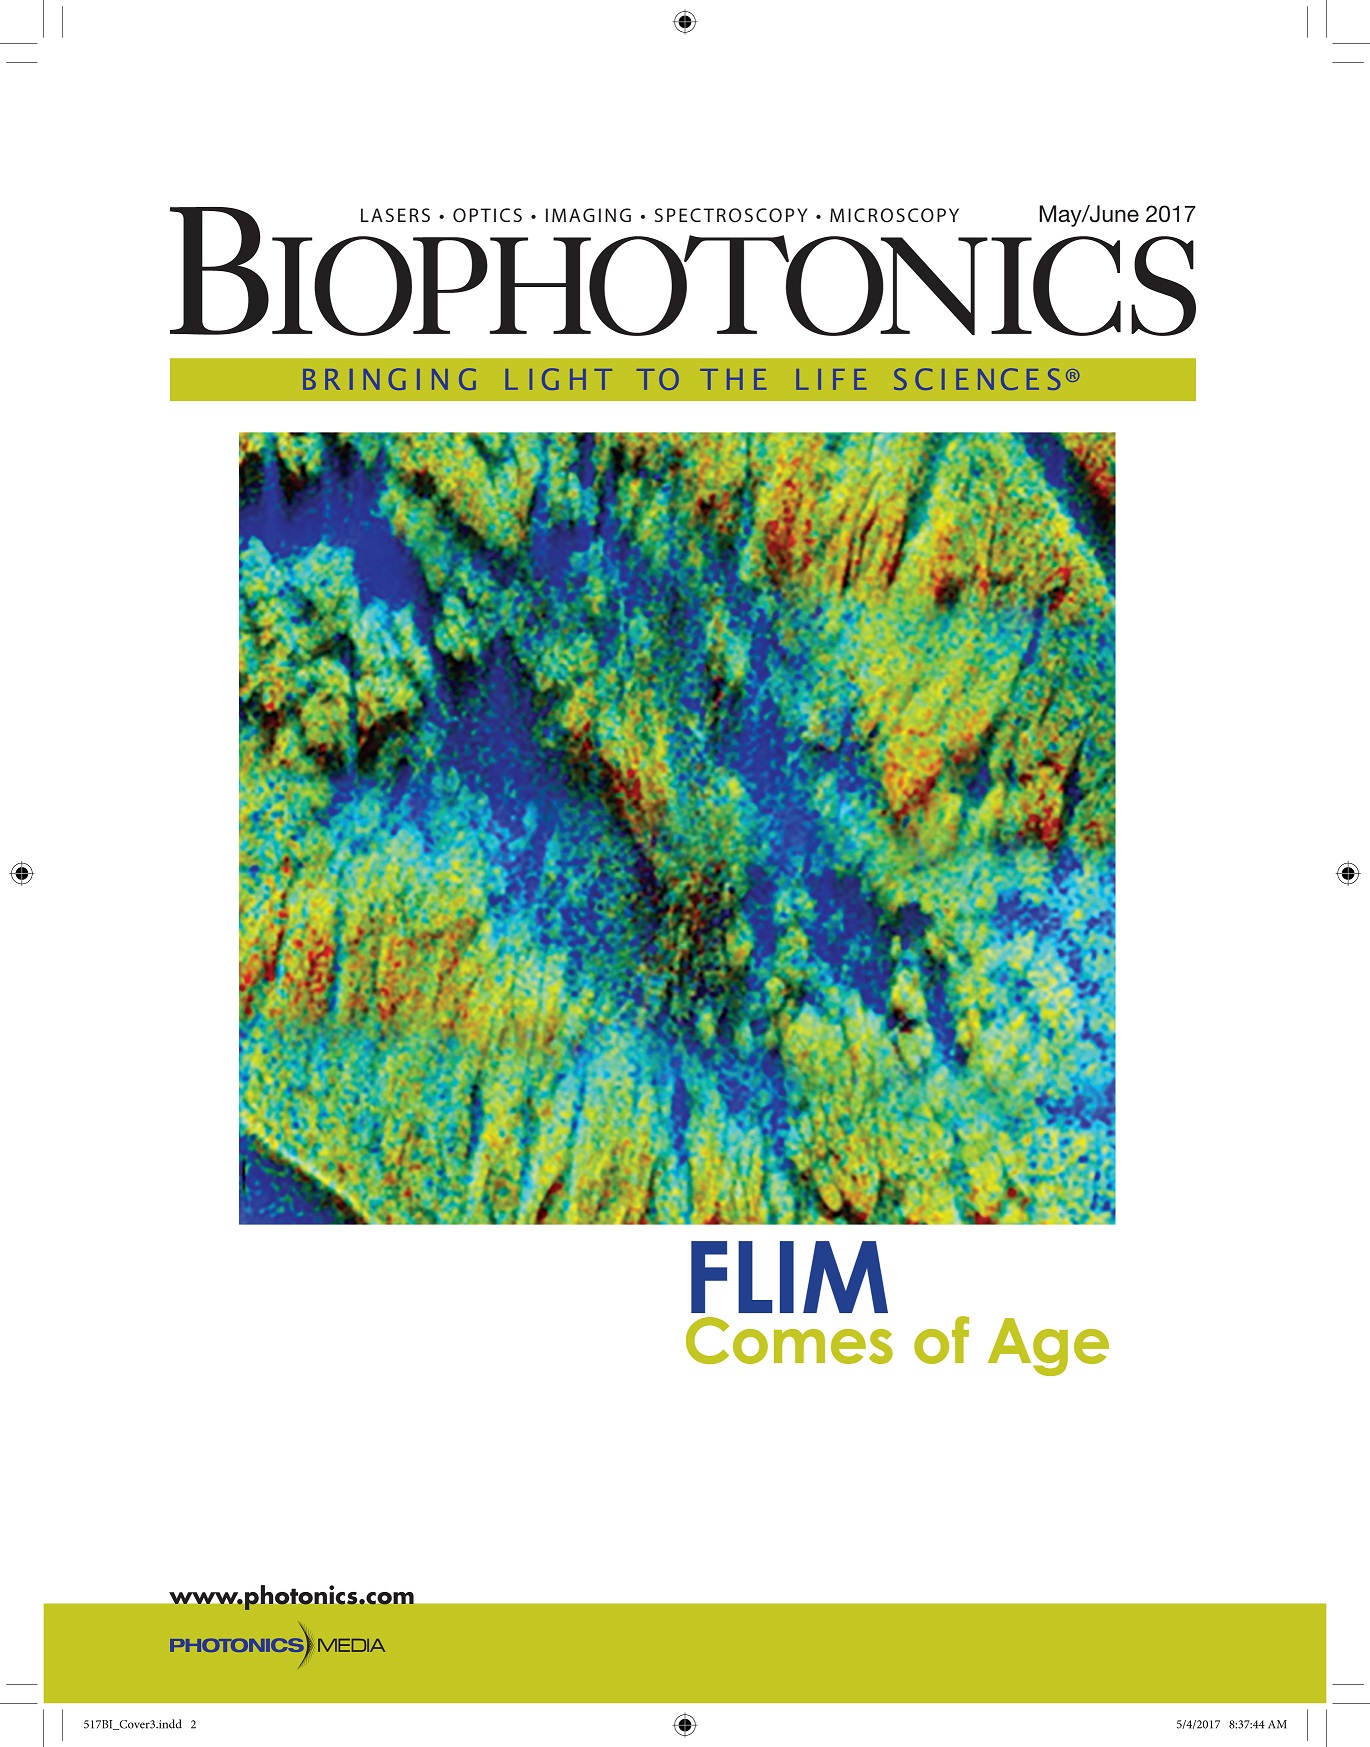 FLIM delivers intracellular images based on differences